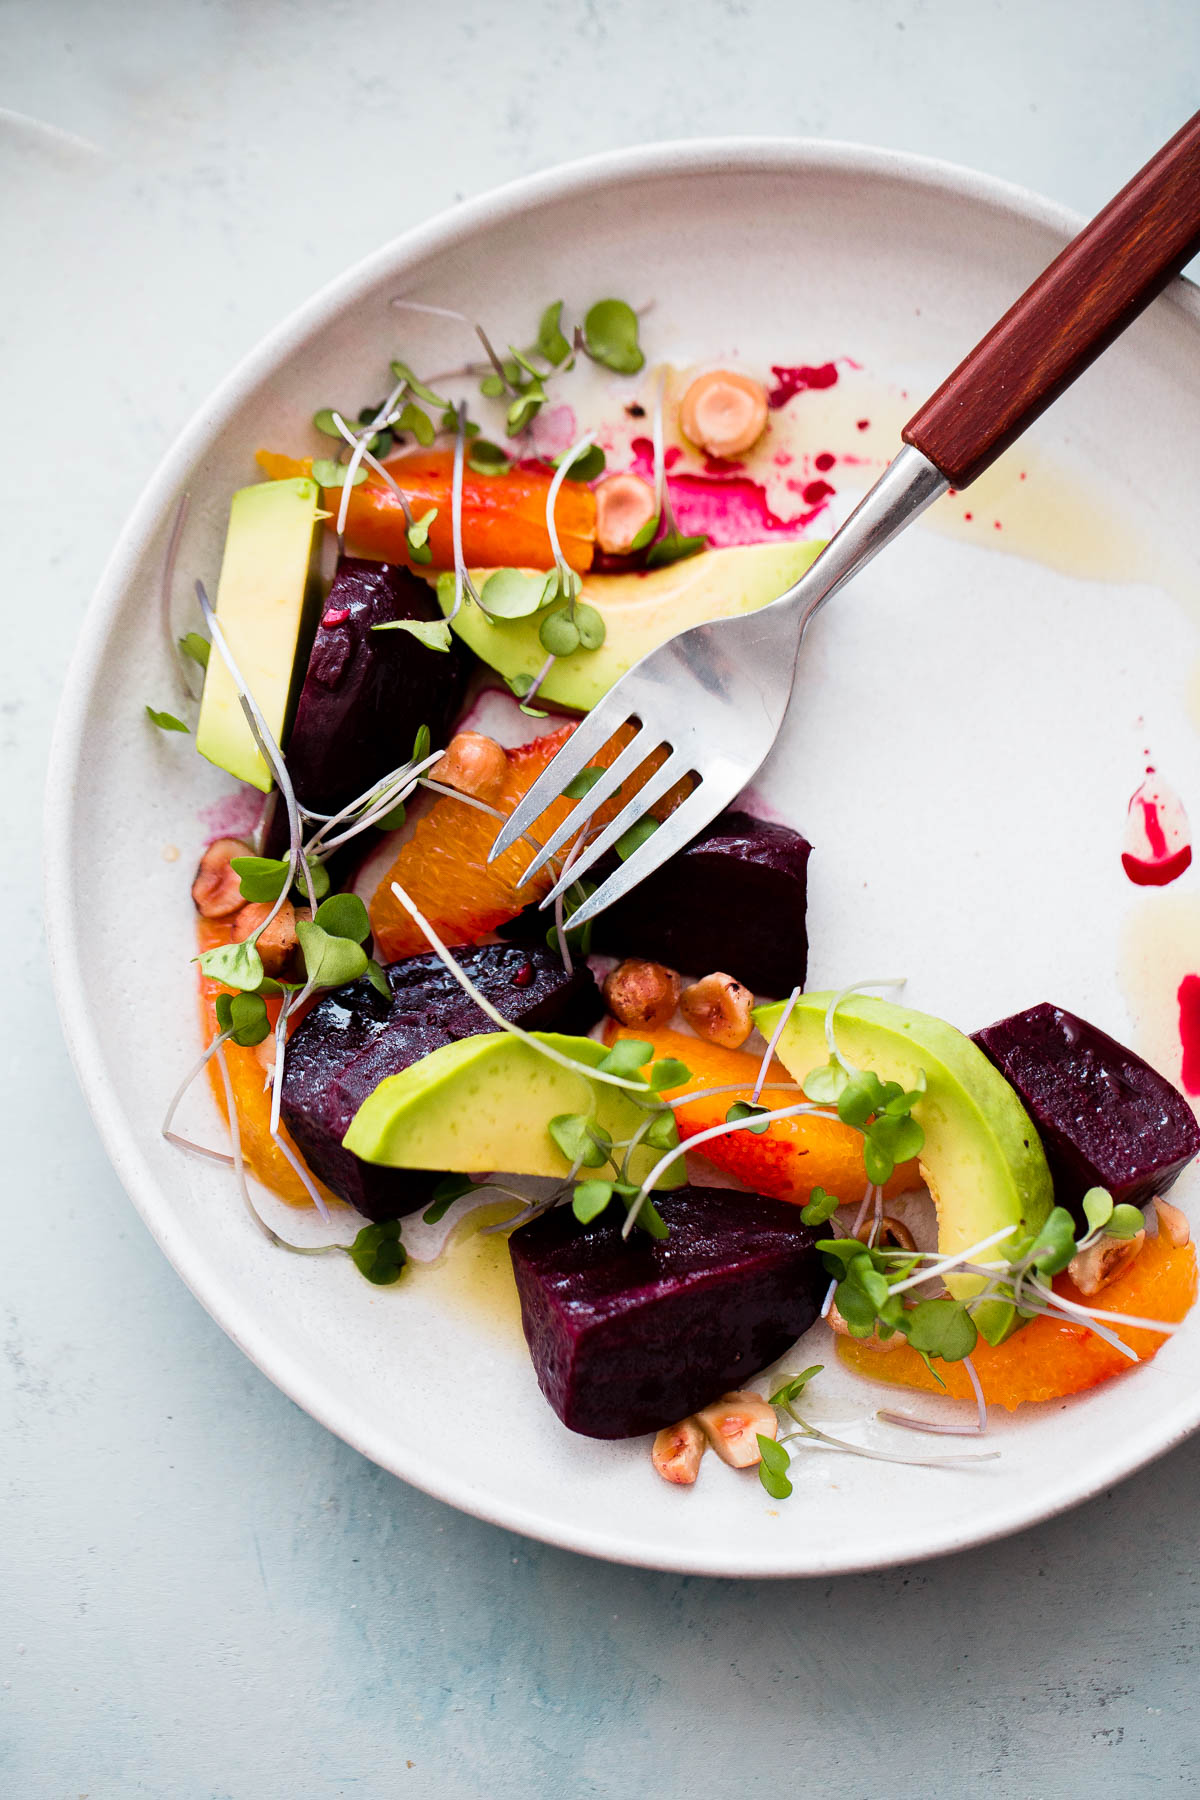 Roasted Beet Salad with Citrus and Avocado